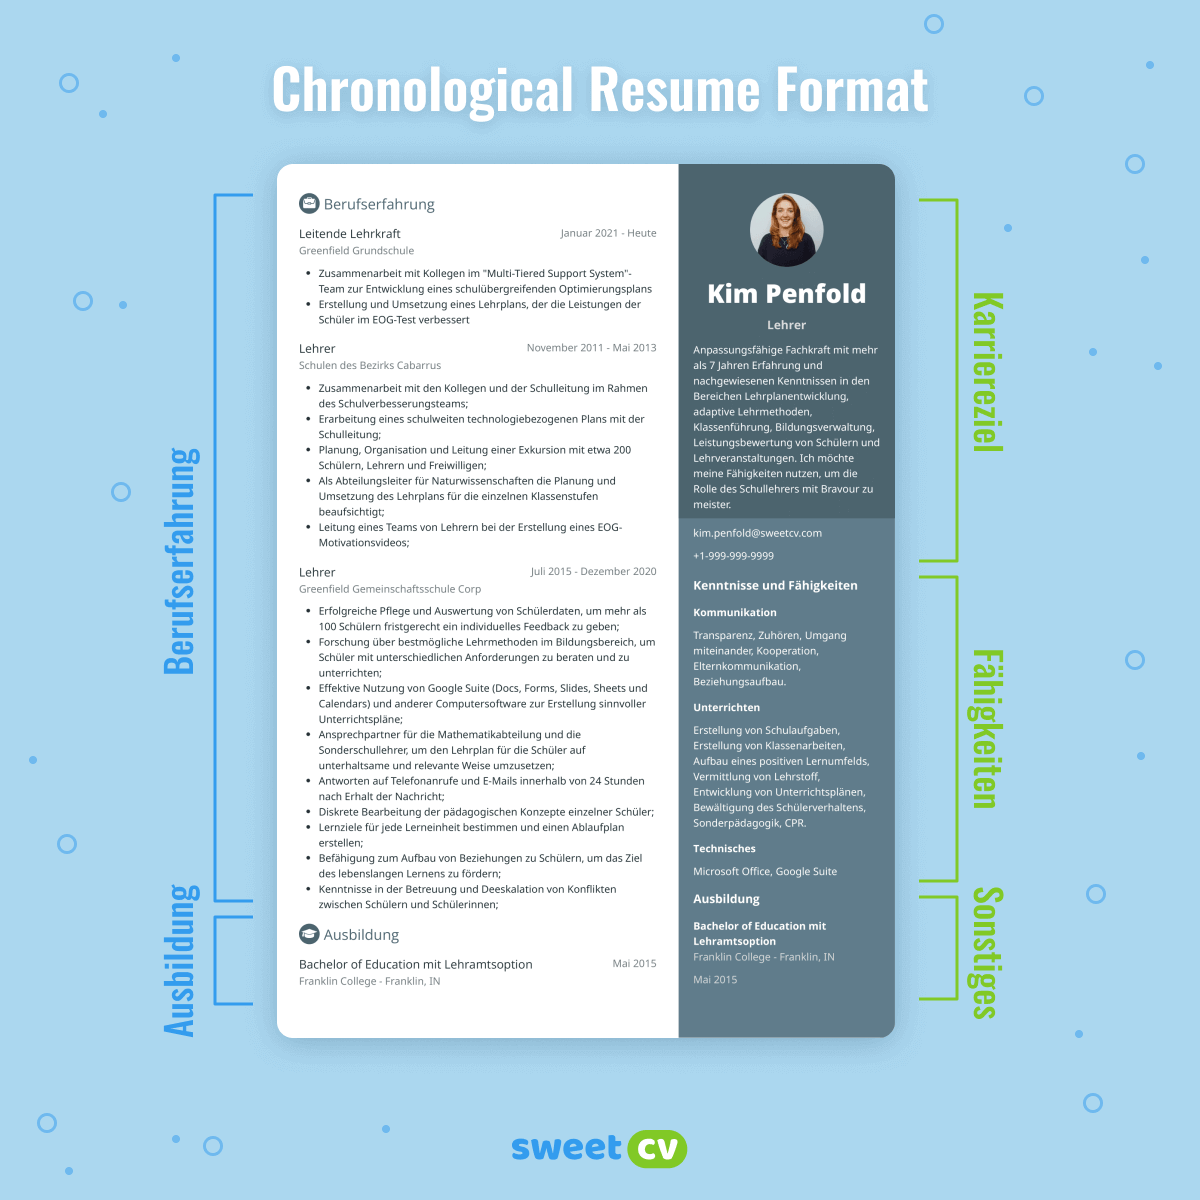 To draw the recruiter's attention to your work experience use reverse chronological resume format